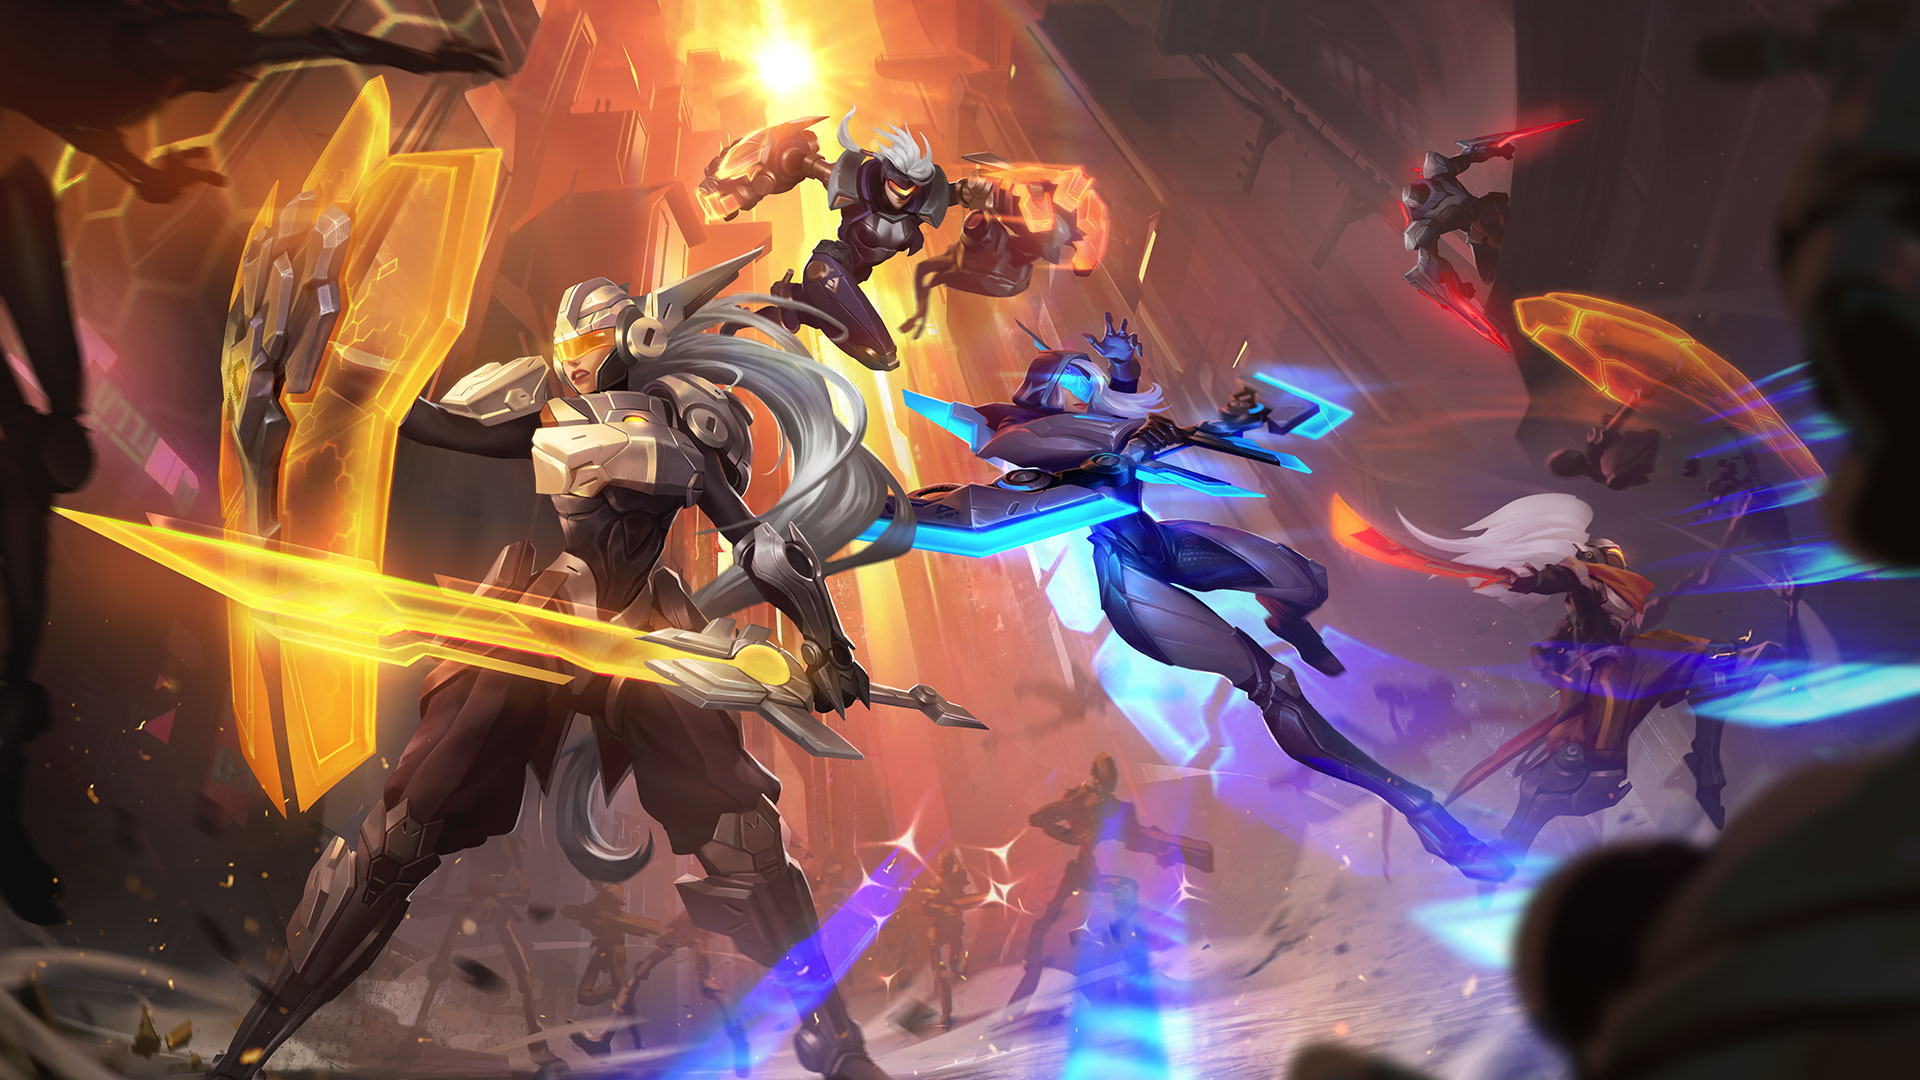 General 1920x1080 League of Legends League of Legends: Wild Rift Leona (League of Legends) Vi (League of Legends) Ashe (League of Legends) Yasuo (League of Legends) Zed (League of Legends) Lucian (League of Legends) PC gaming video game girls